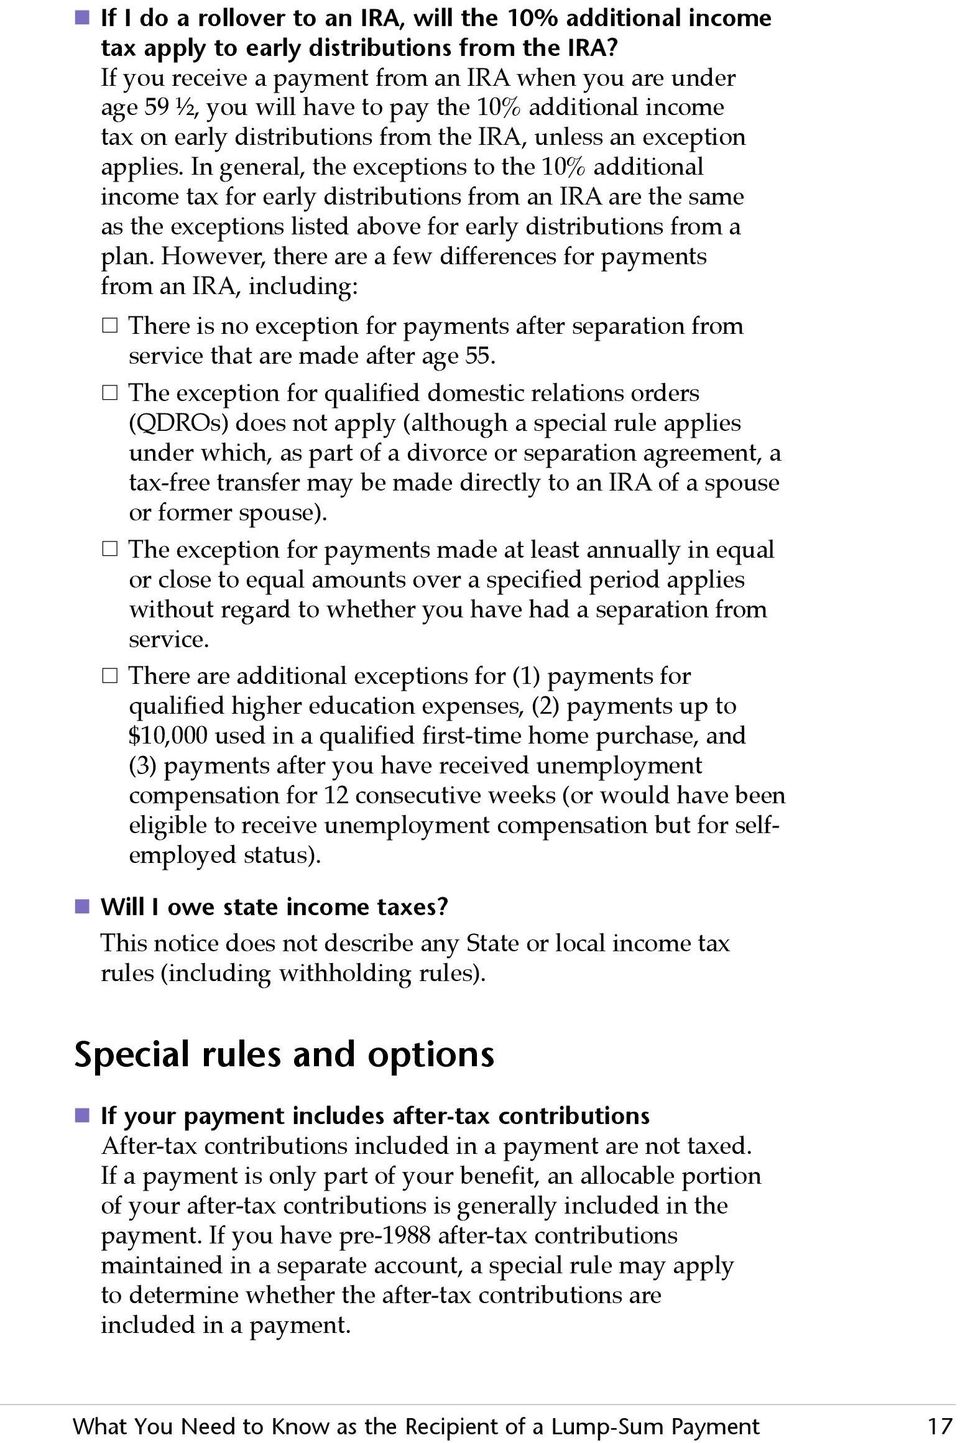 In general, the exceptions to the 10% additional income tax for early distributions from an IRA are the same as the exceptions listed above for early distributions from a plan.